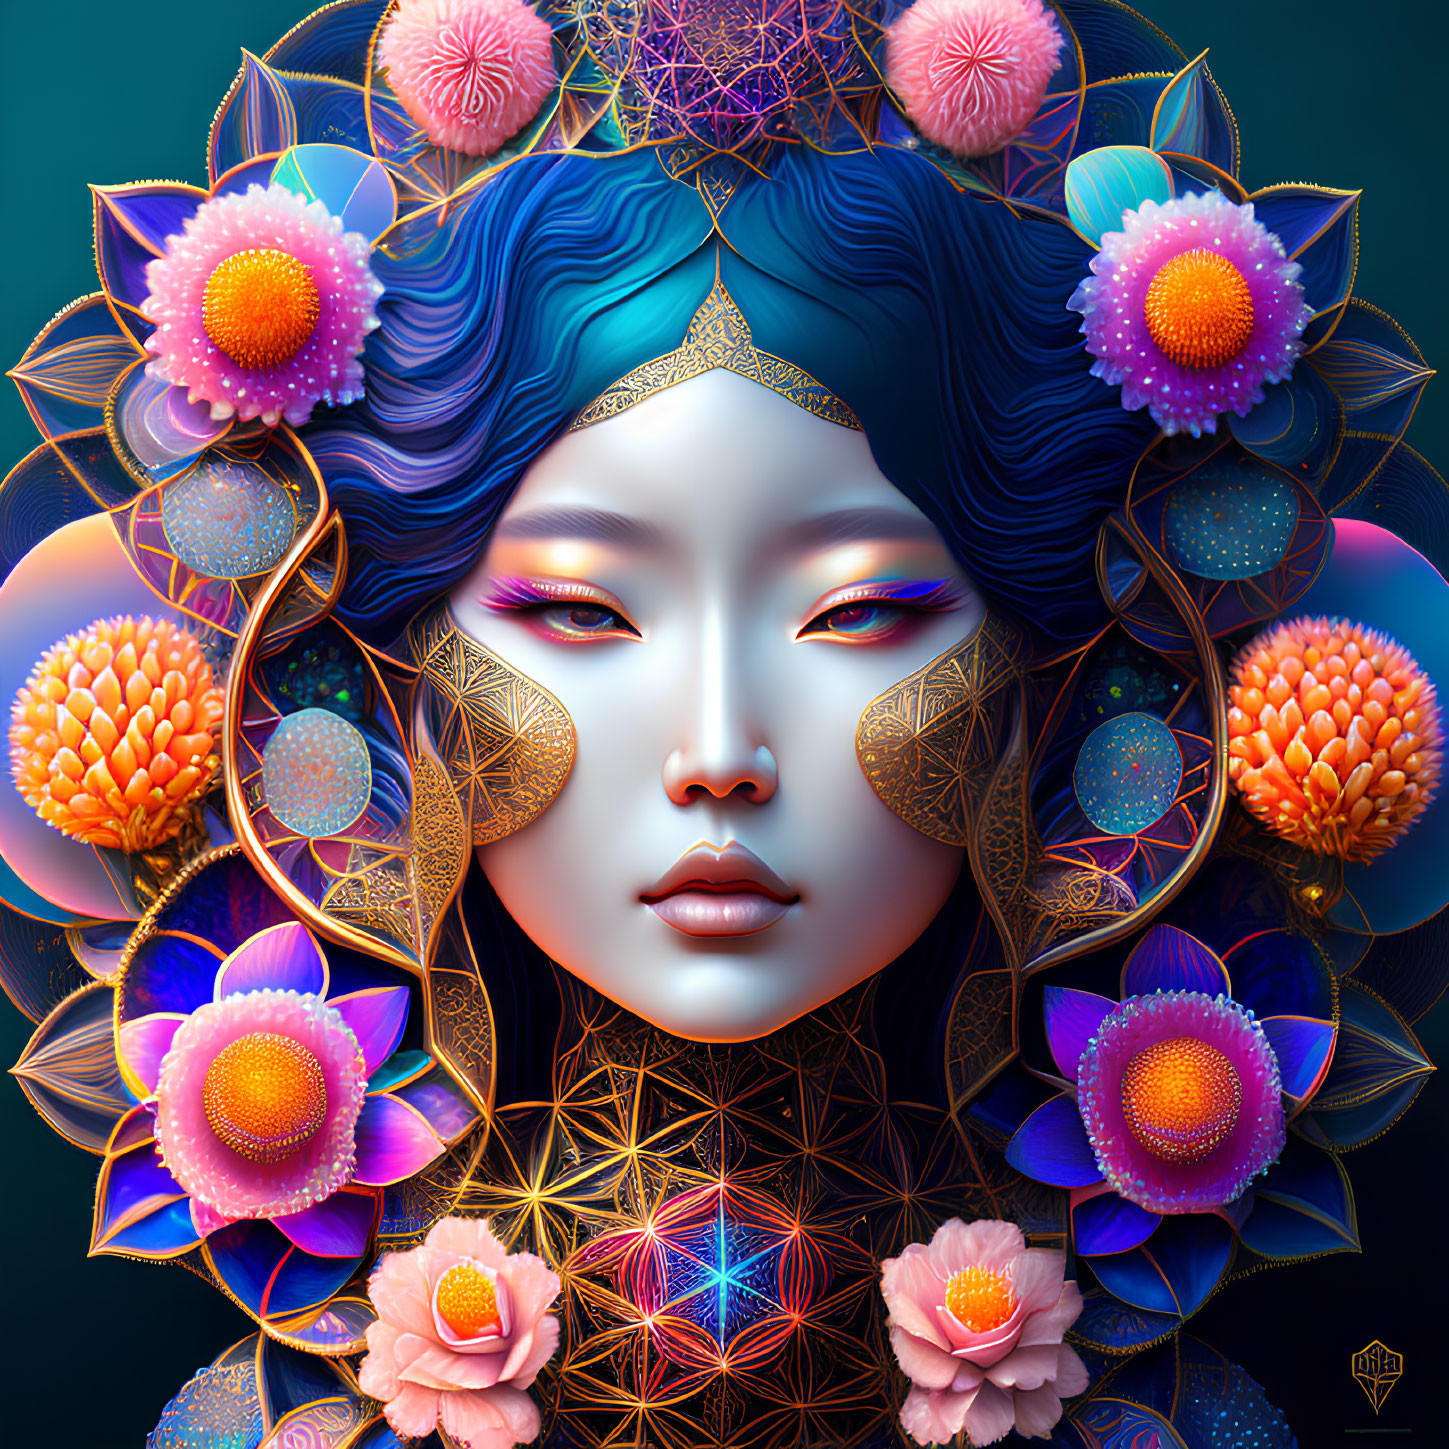 Colorful digital artwork: Woman's face with flowers & geometric patterns